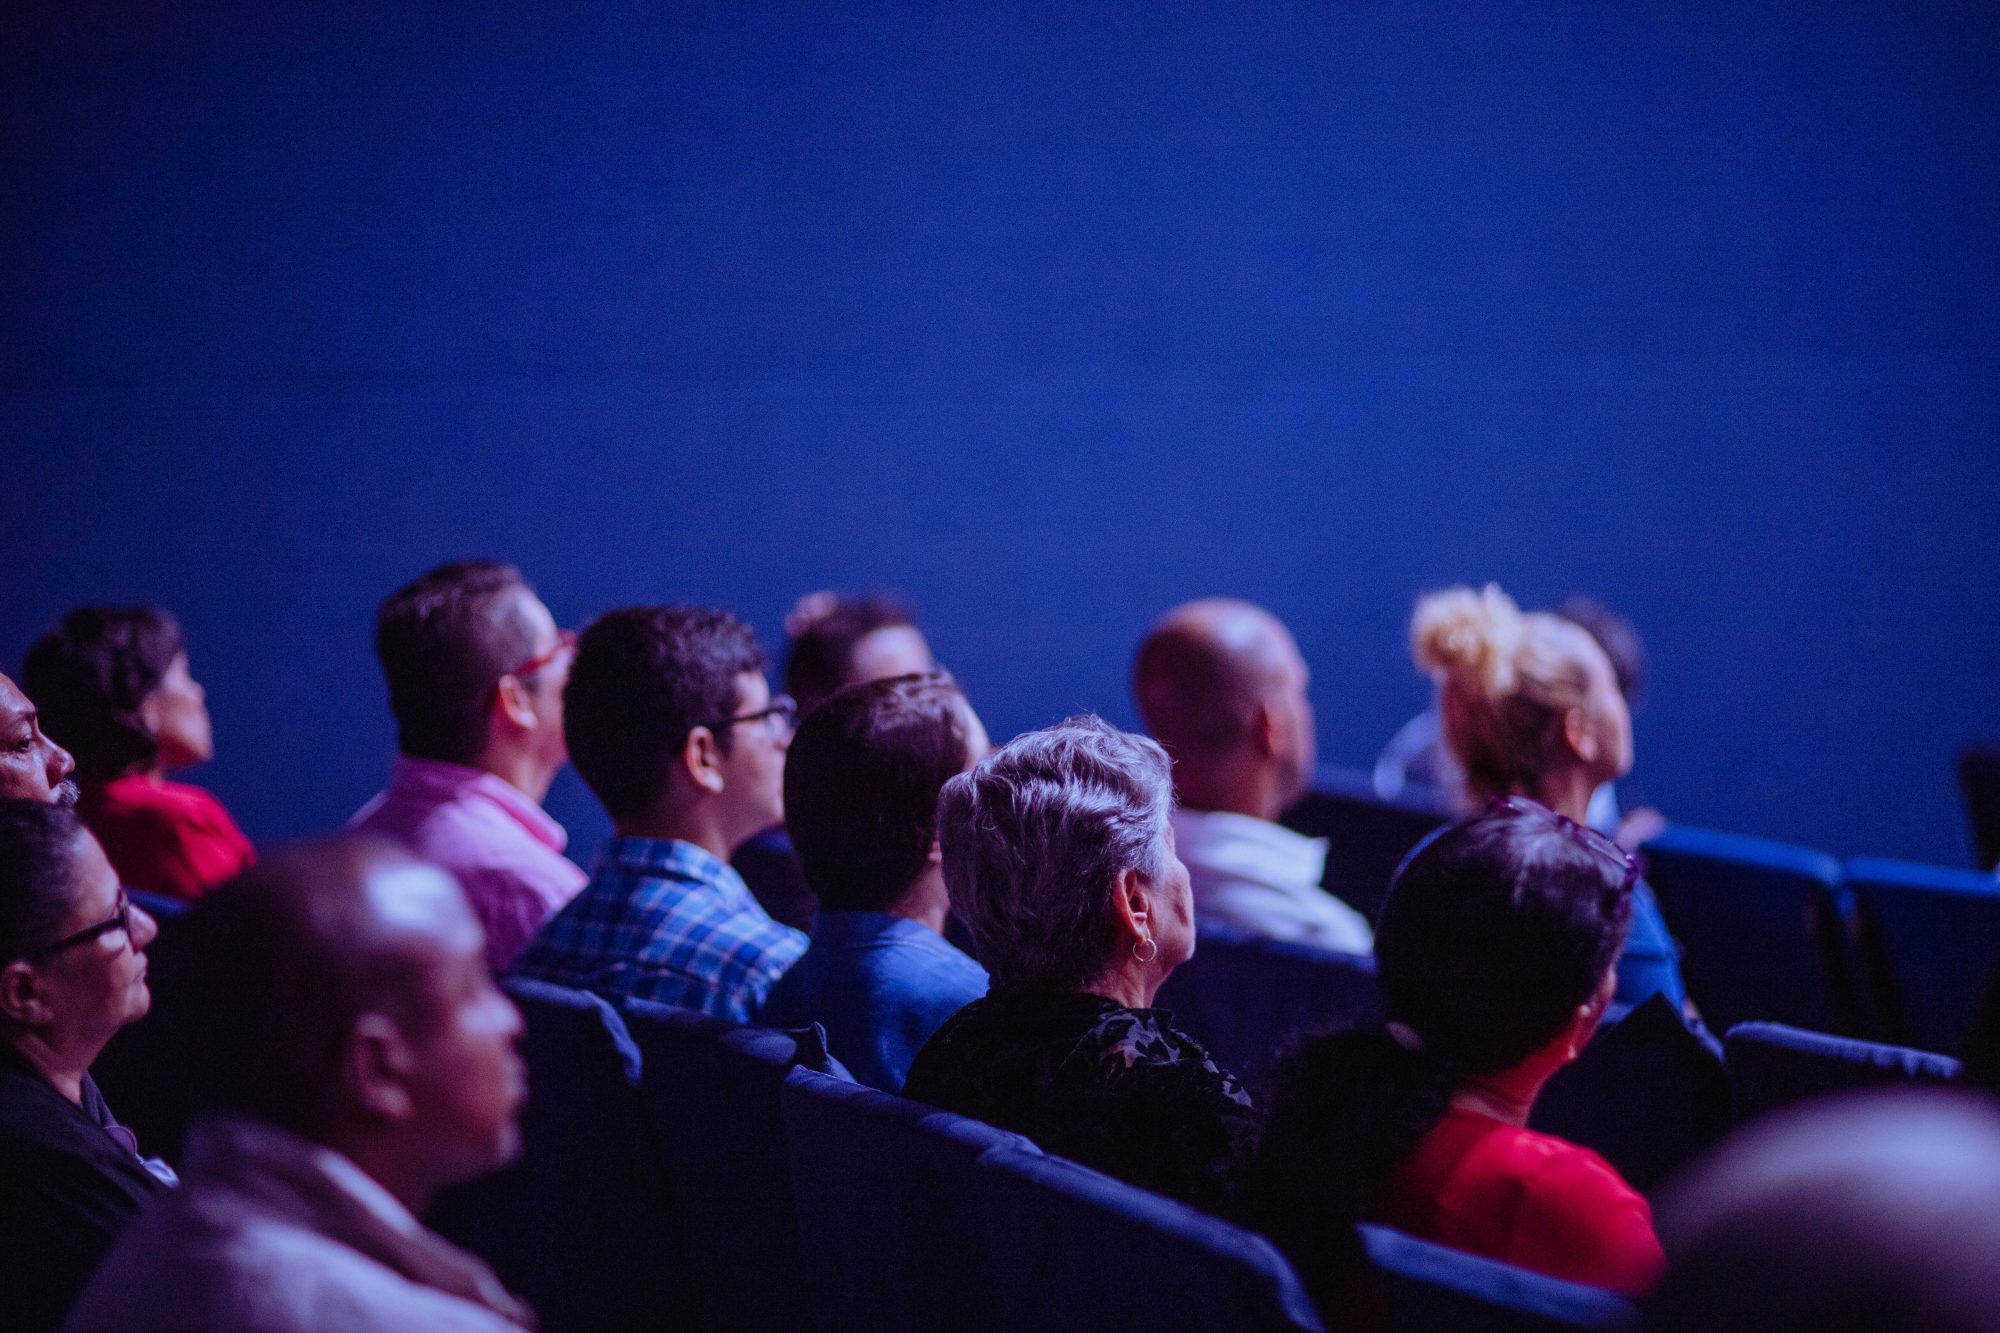 Keeping your Customers COVID-19 Safe in the Cinema